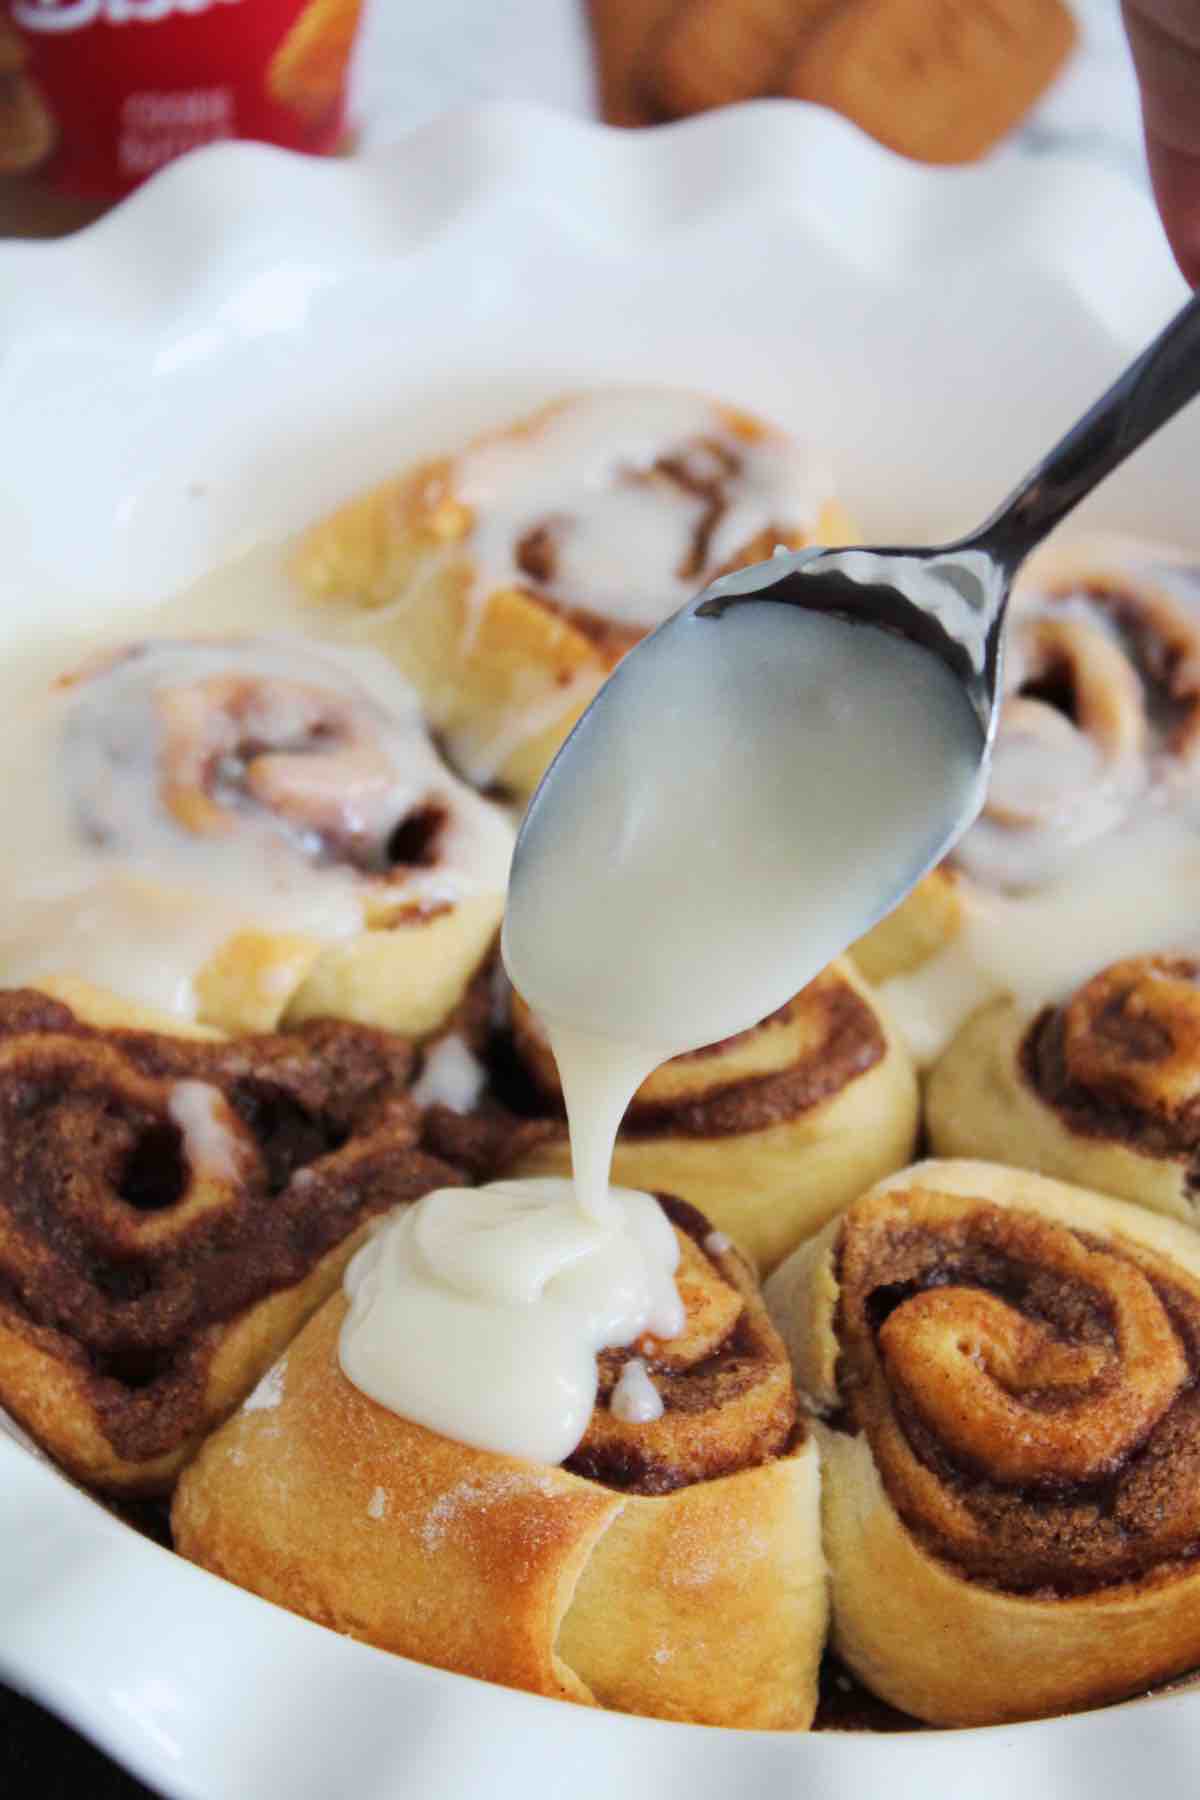 Pour the cream cheese icing over the cinnamon rolls while they are still warm.